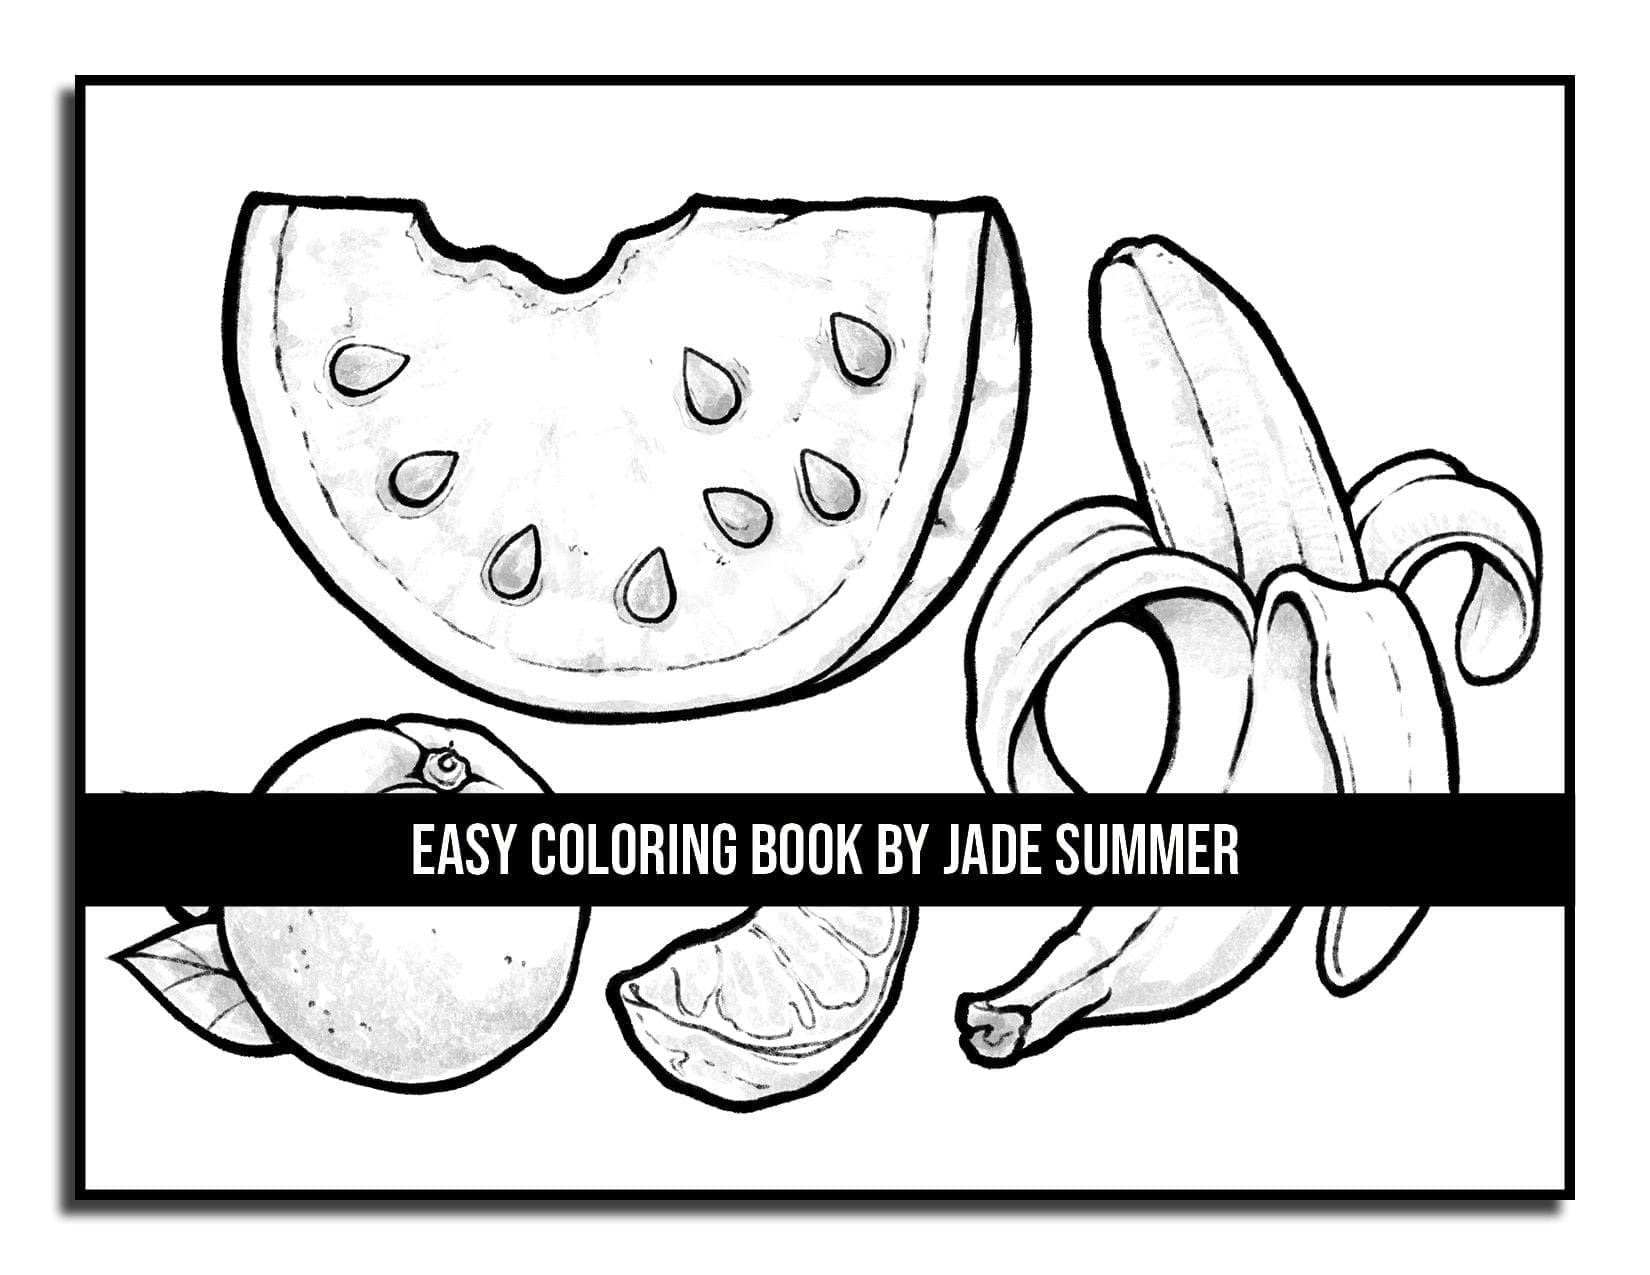 Hottest New Coloring Books: Summer 2017 Roundup - Cleverpedia